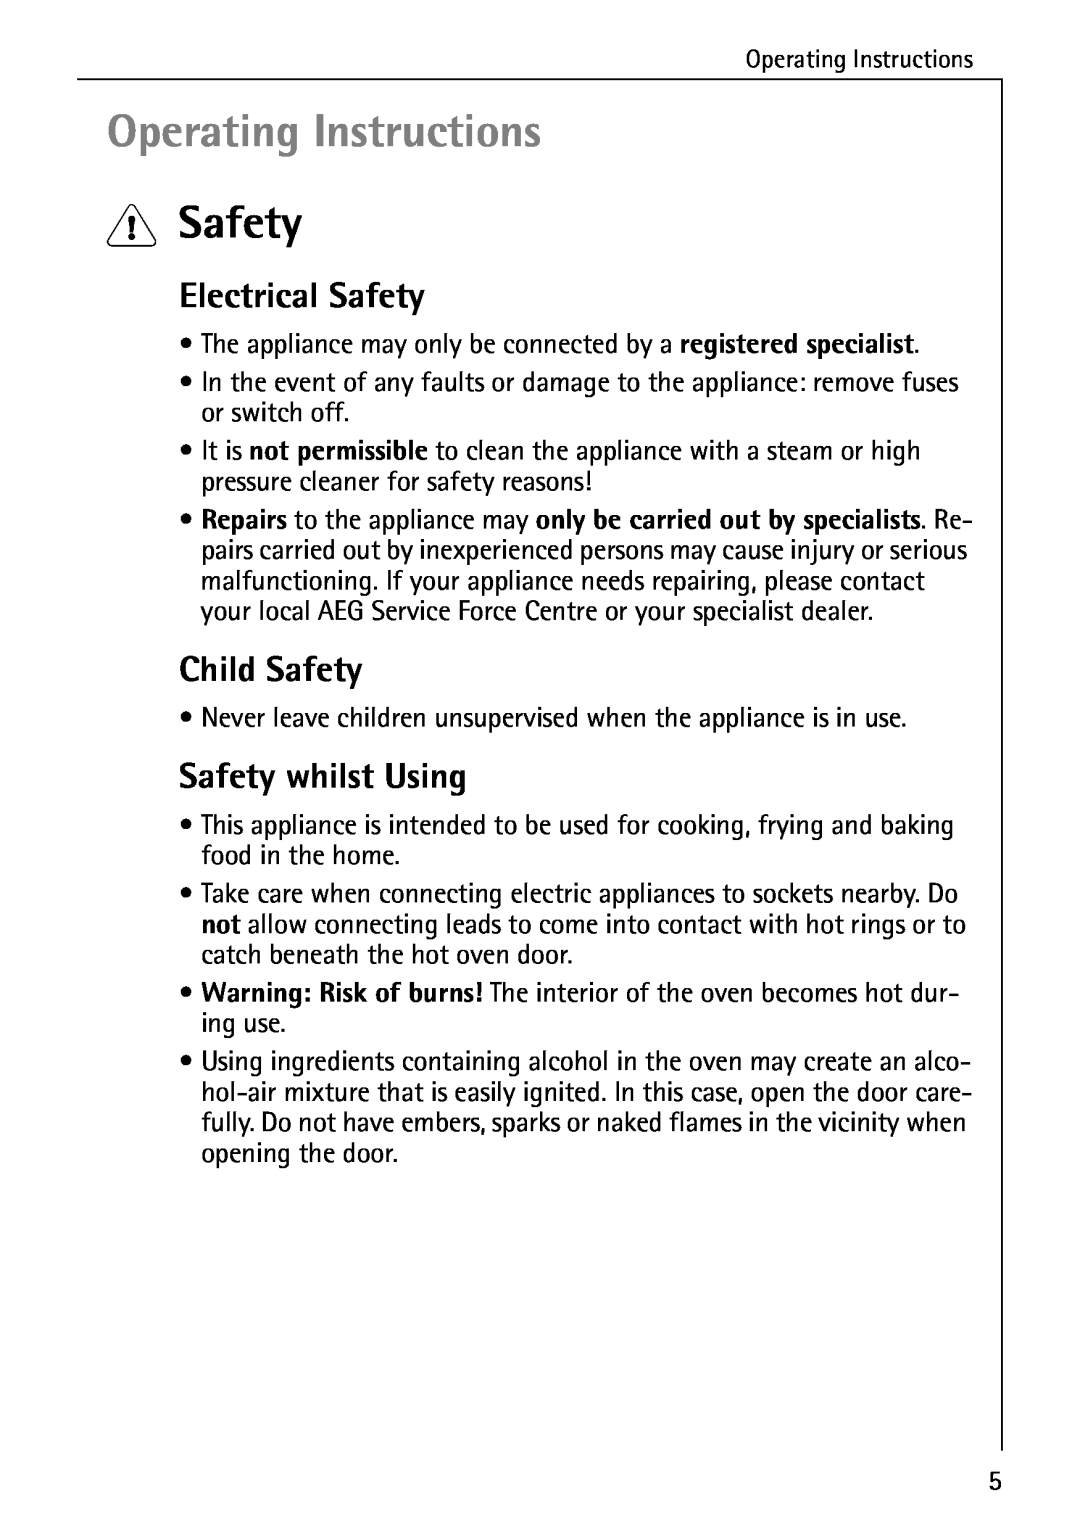 Electrolux B2190-1 manual Operating Instructions, Electrical Safety, Child Safety, Safety whilst Using 